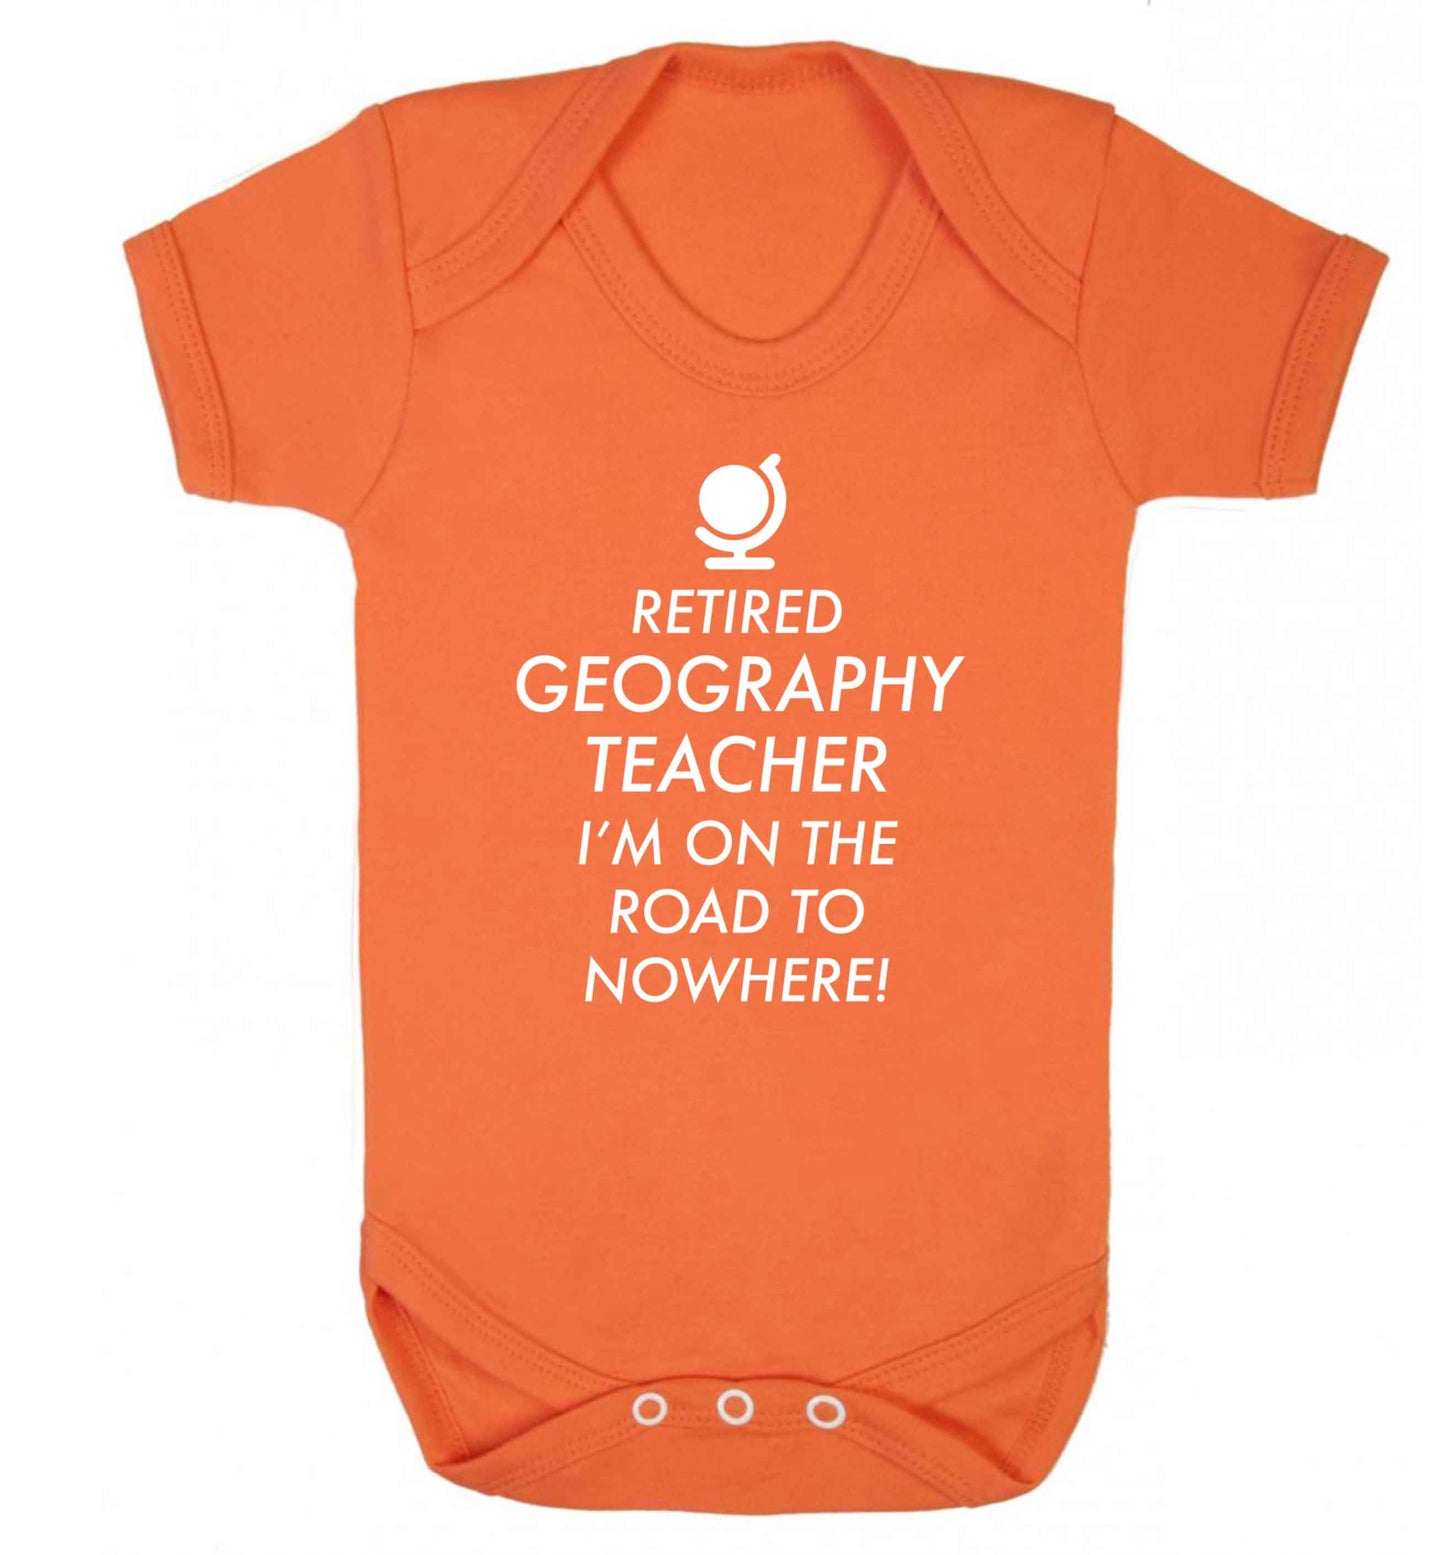 Retired geography teacher I'm on the road to nowhere Baby Vest orange 18-24 months